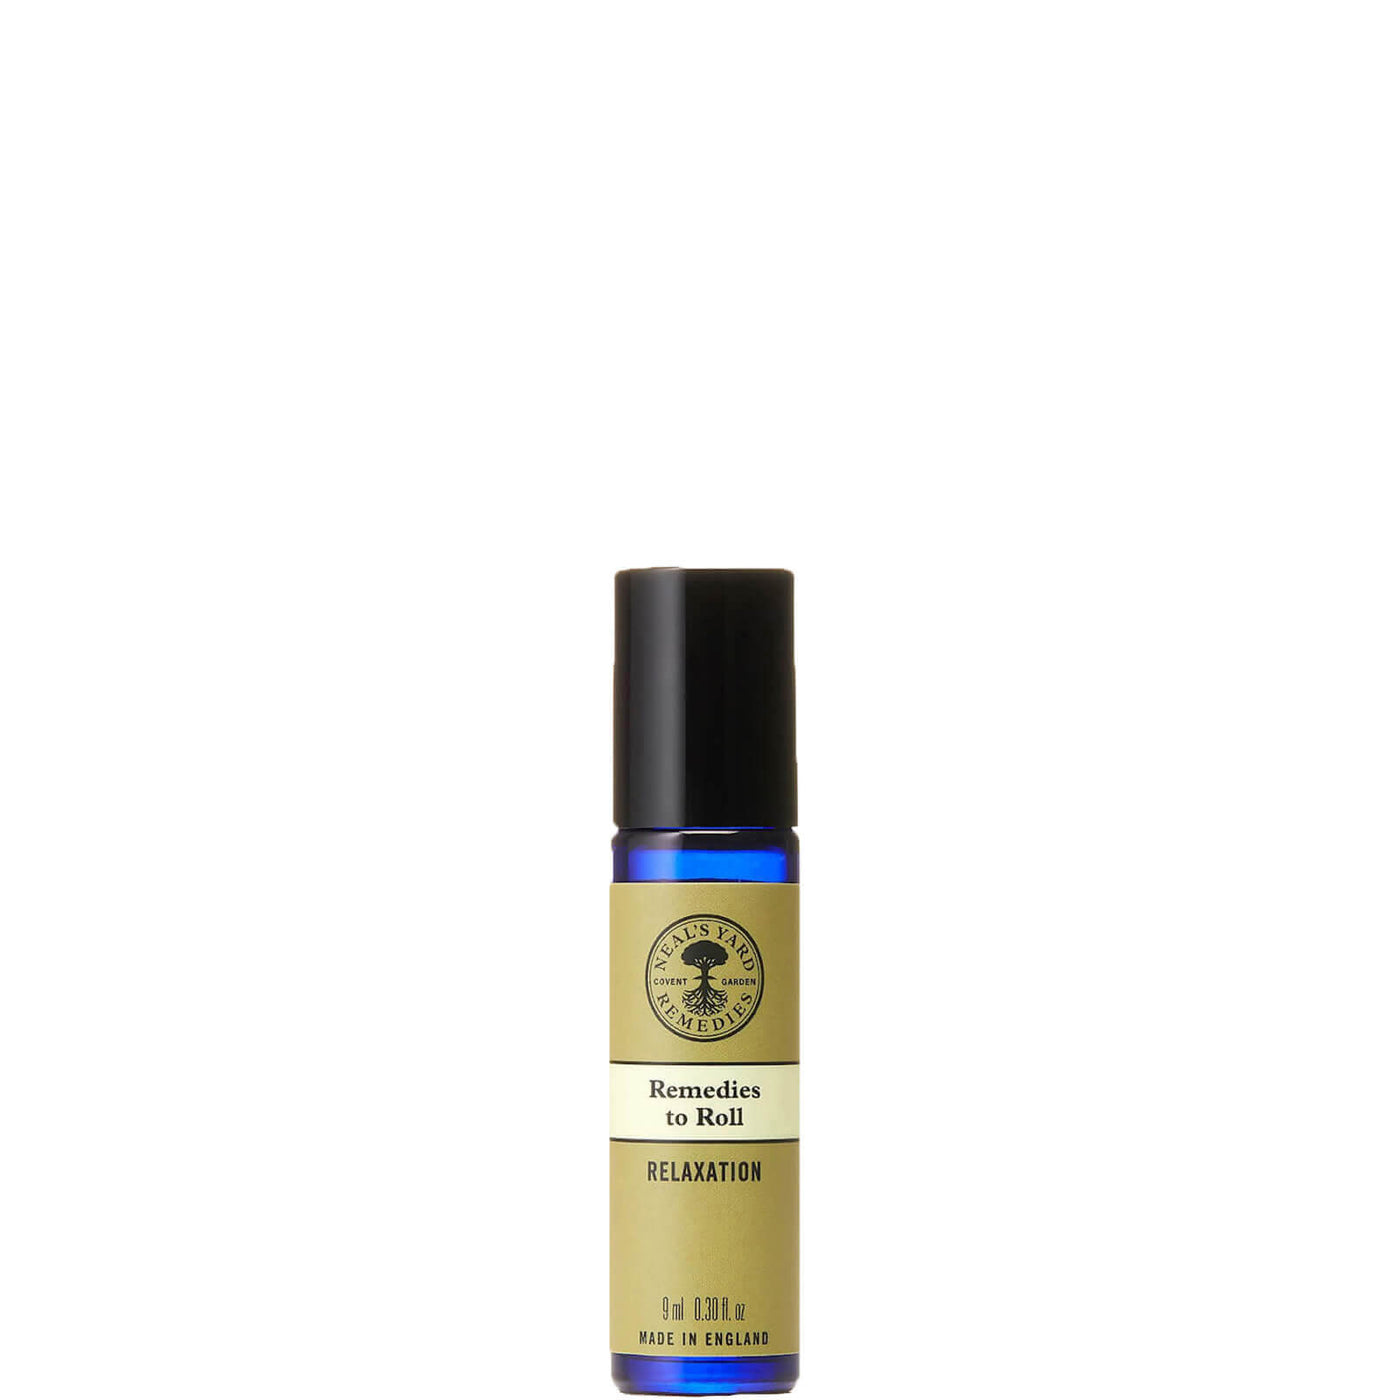 Neal's Yard Remedies to Roll Relaxation Blend 9ml